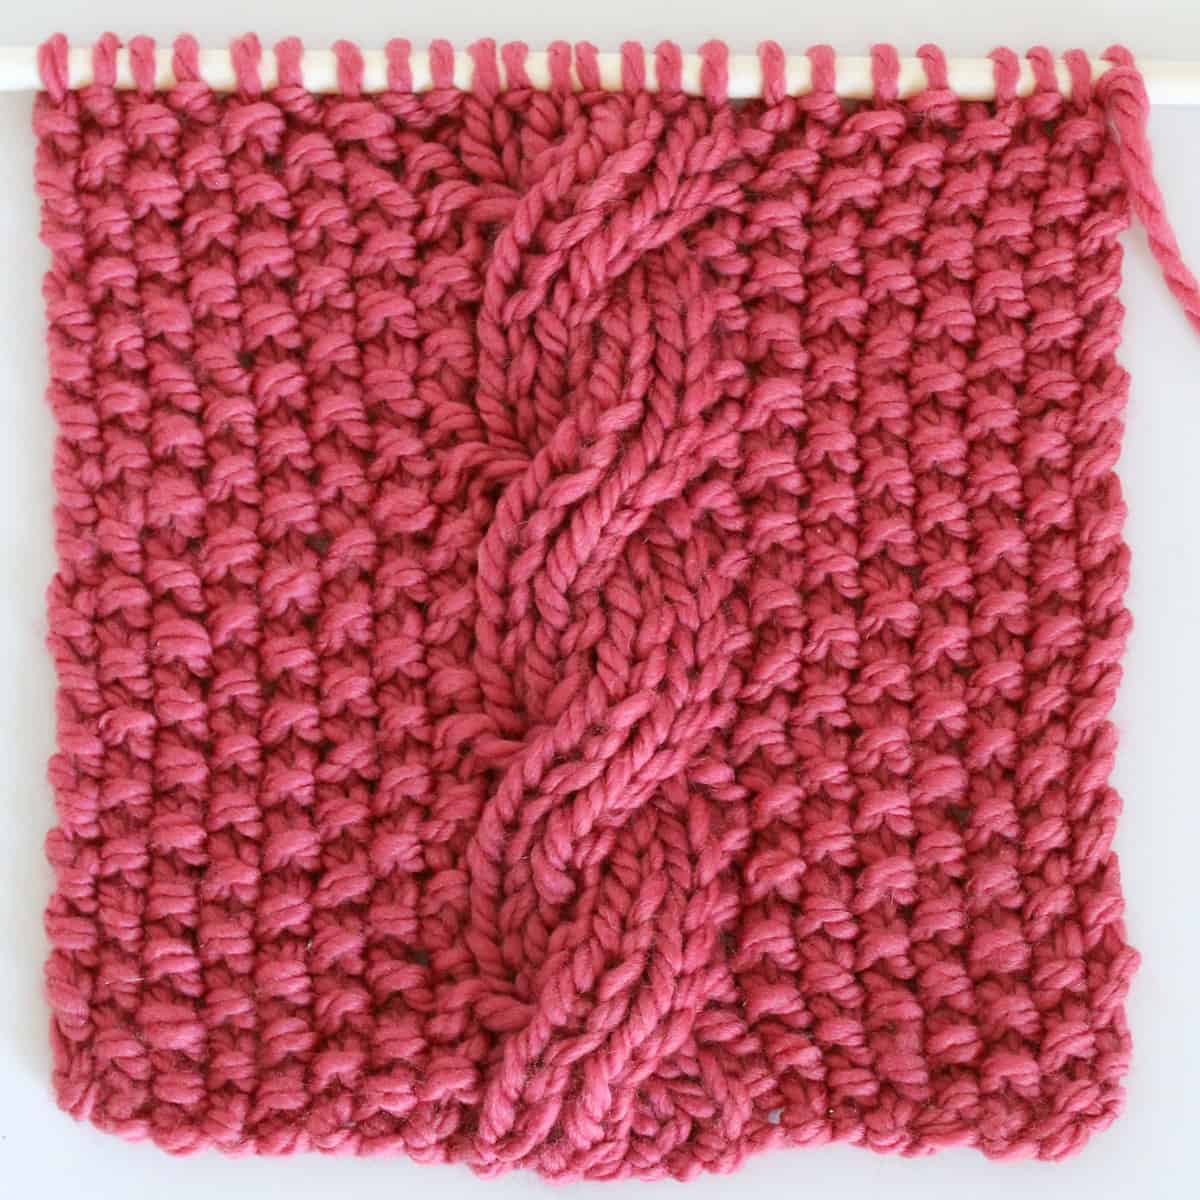 Reversible Cable Stitch Ribbles on Seed Stitch Background in pink color yarn.